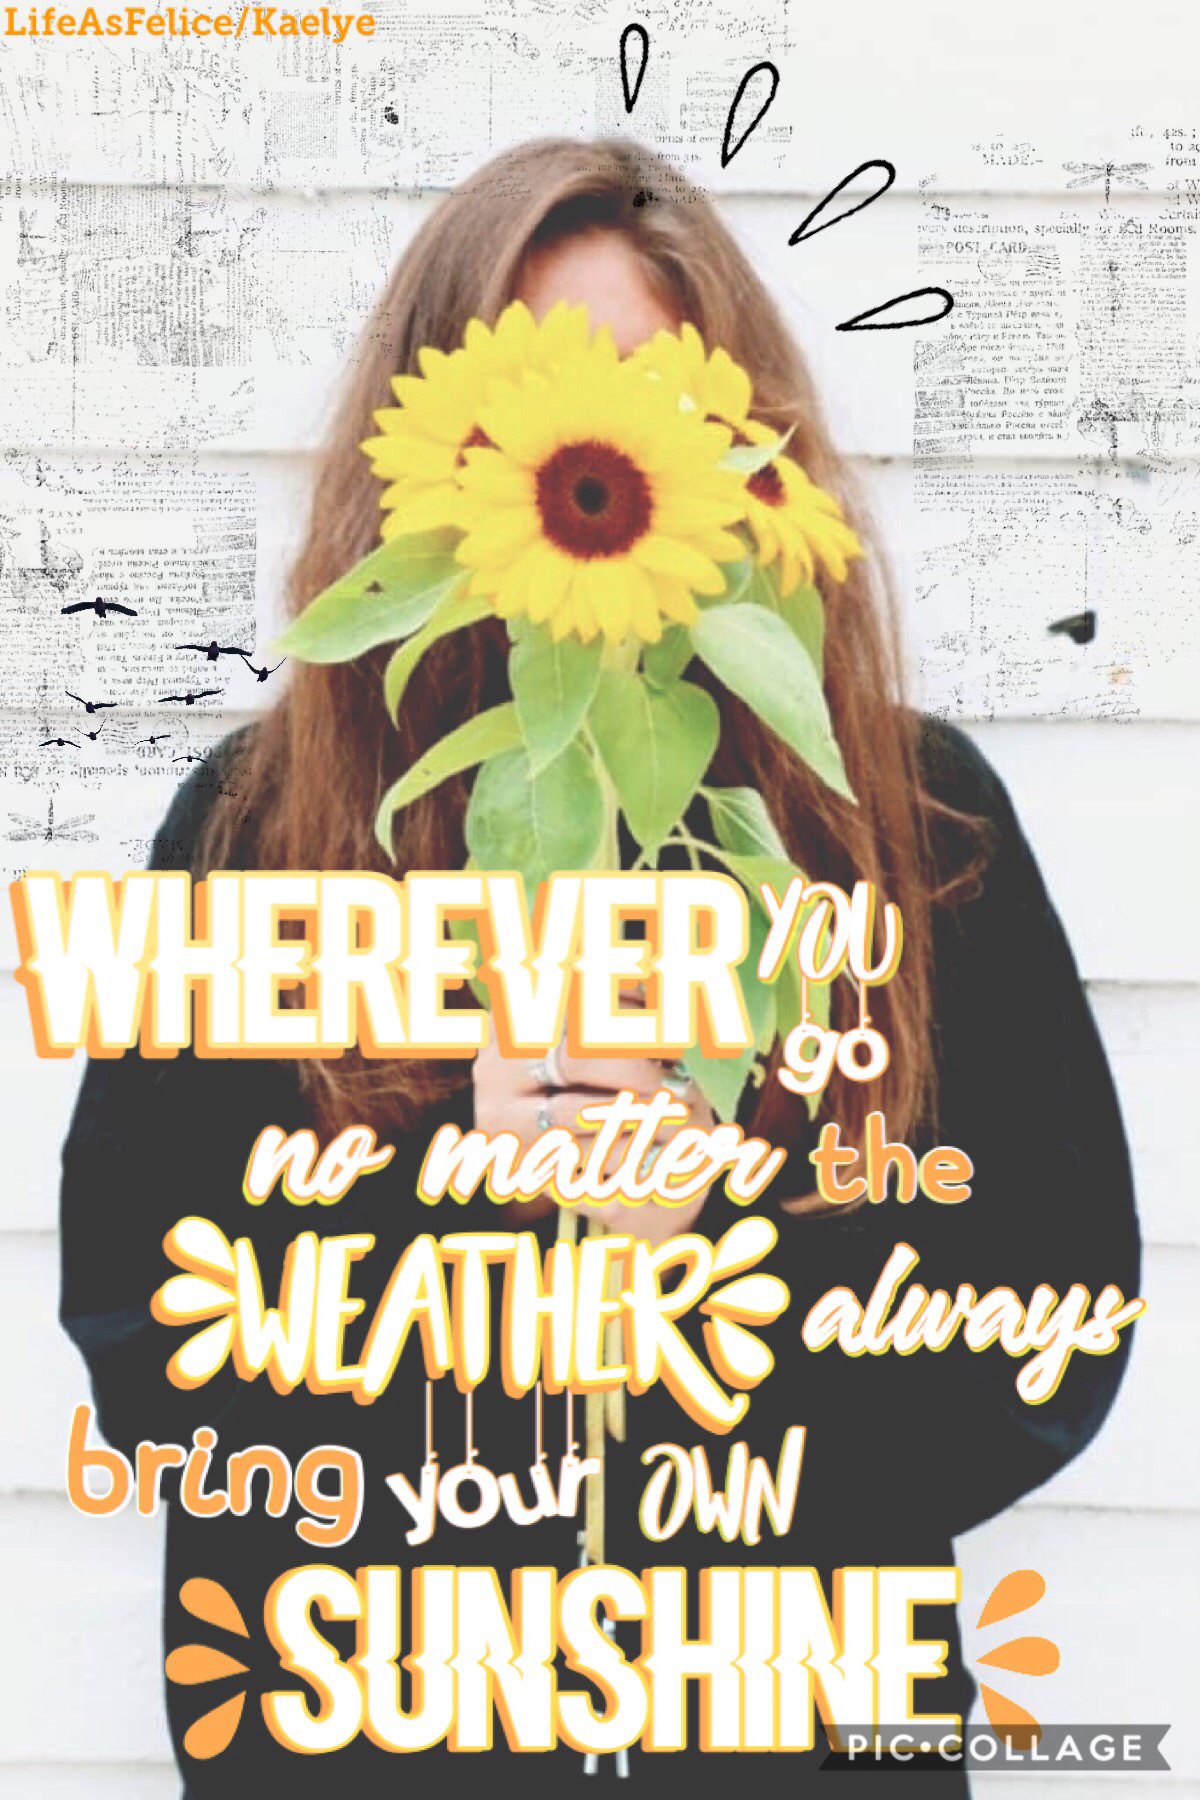  Tap
Collab with Kaelye! She is very talented and there’s a collab sheet at her acc! I made the arrangement of the collage and she chose this wonderful pic and quote!